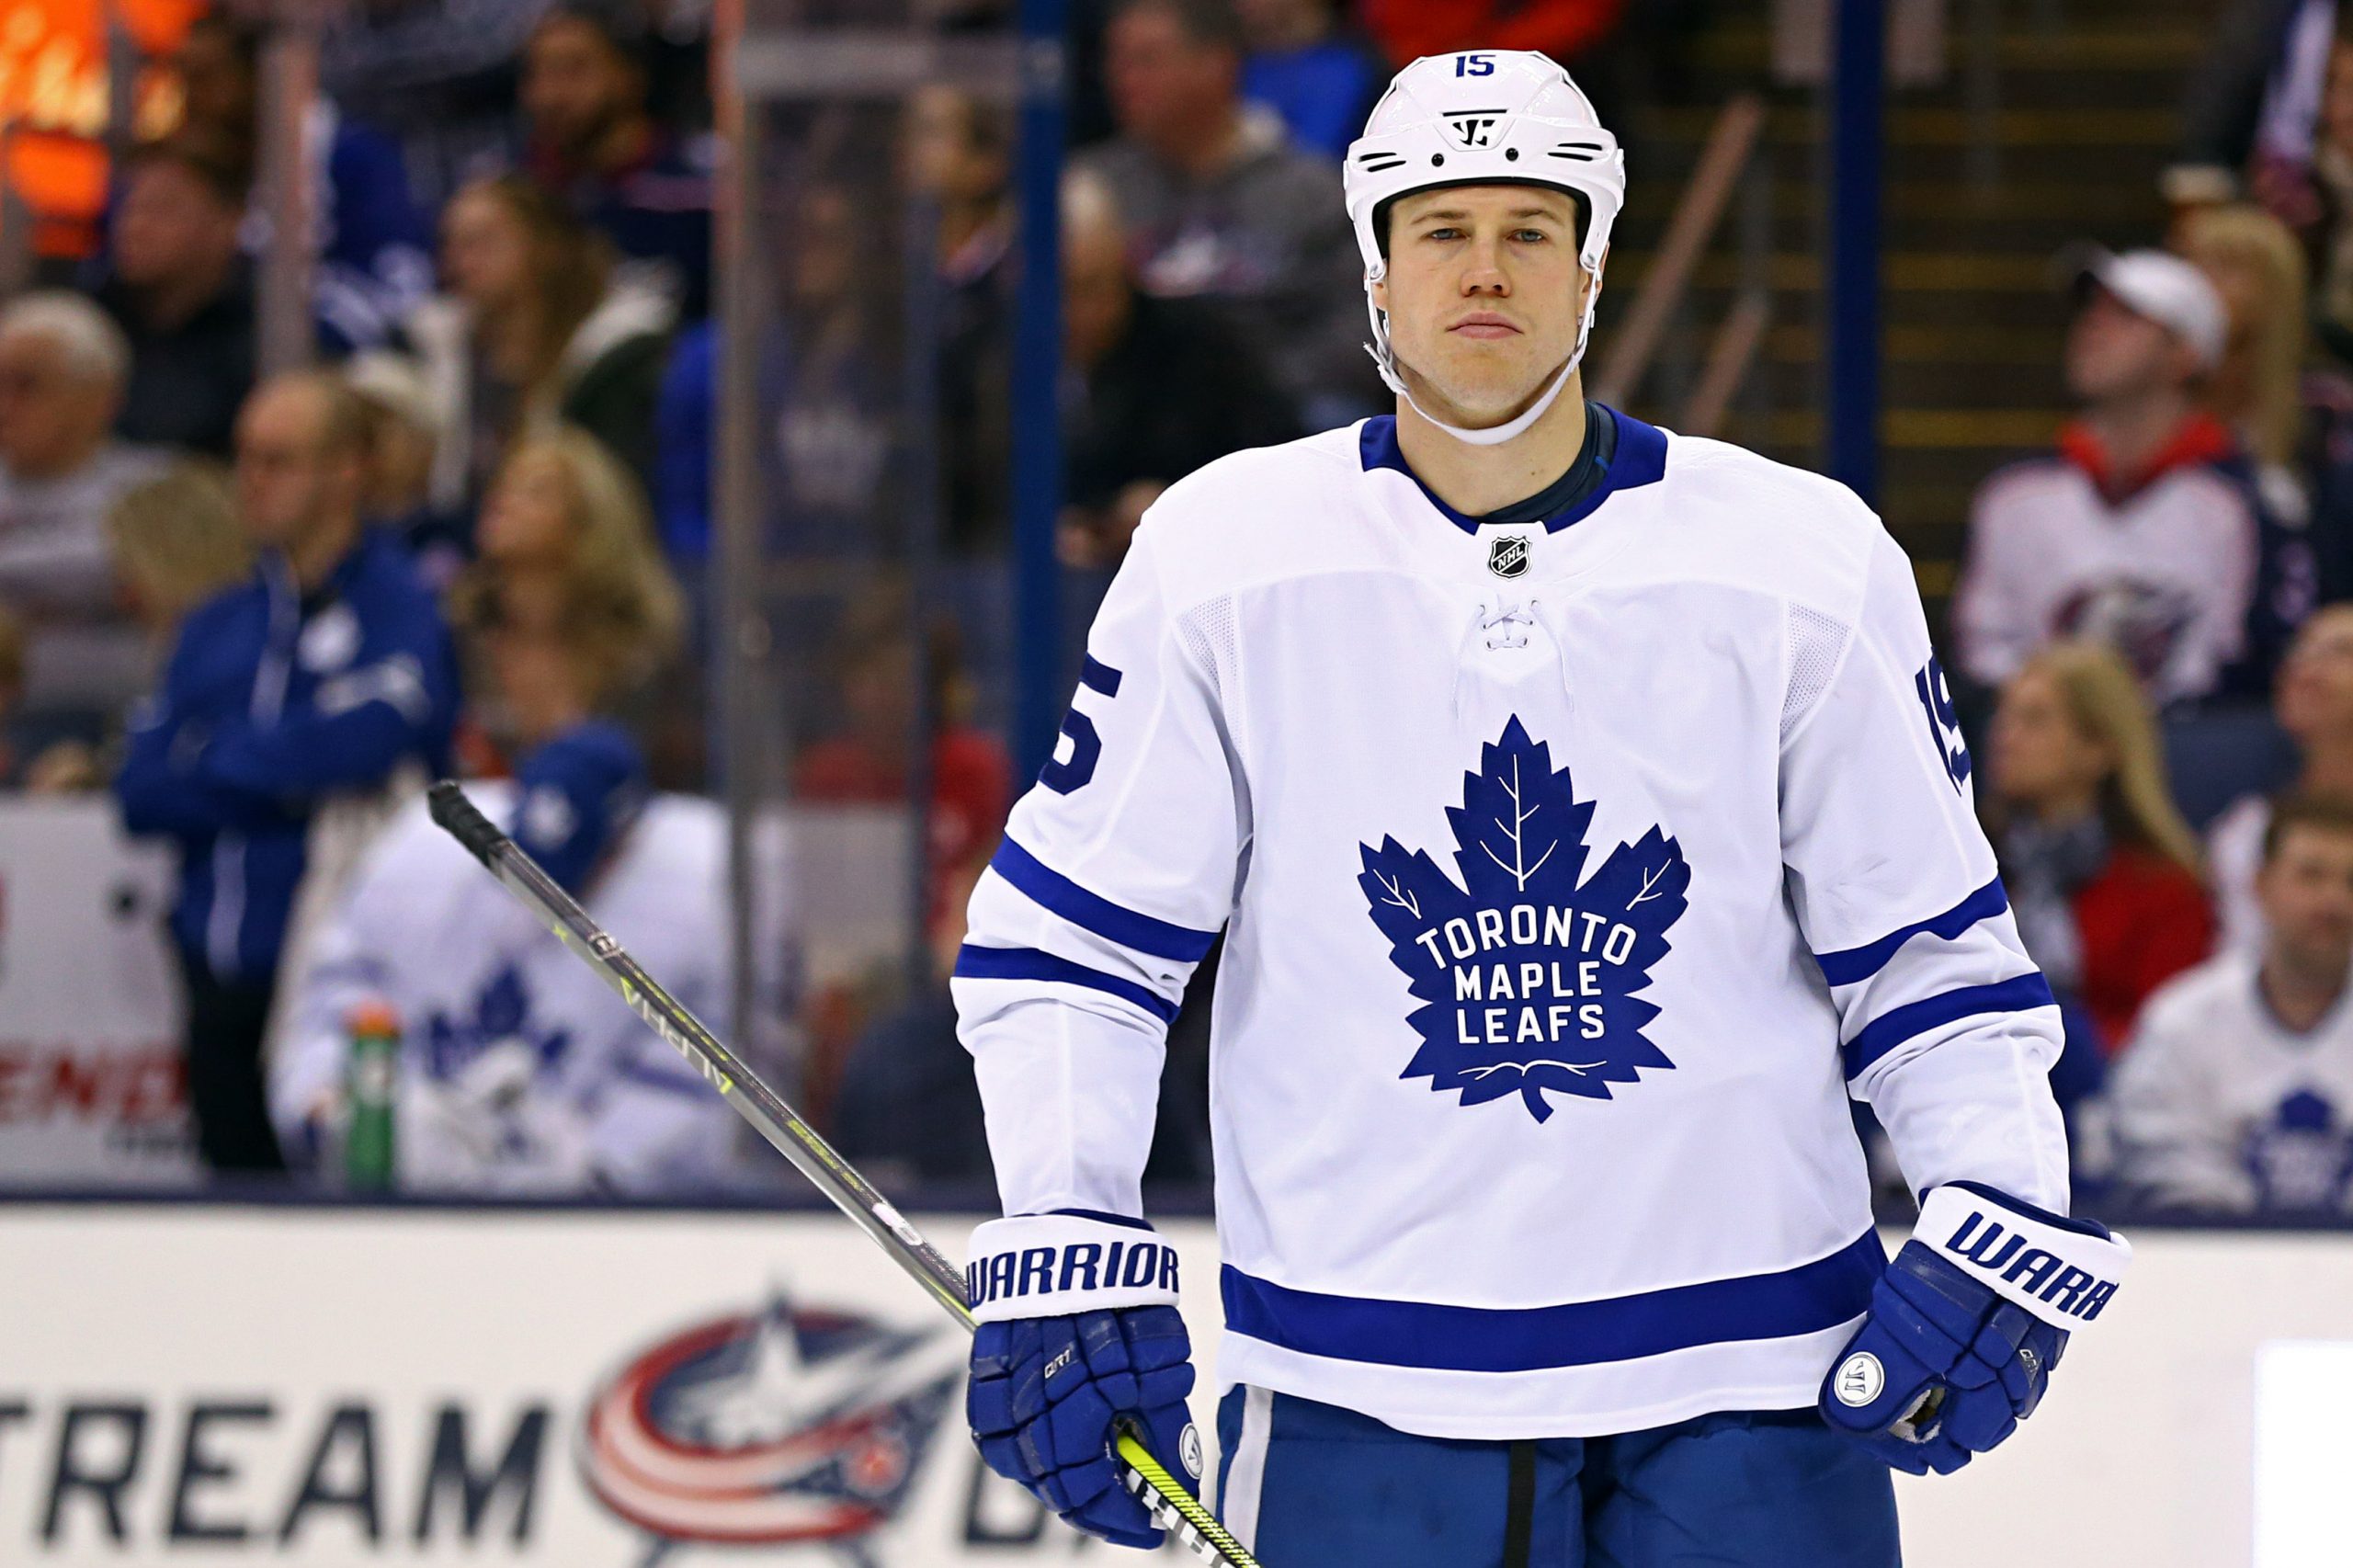 After falling out of favor with the Leafs, Islanders favorite Matt Martin  returns to Toronto a different player - The Athletic